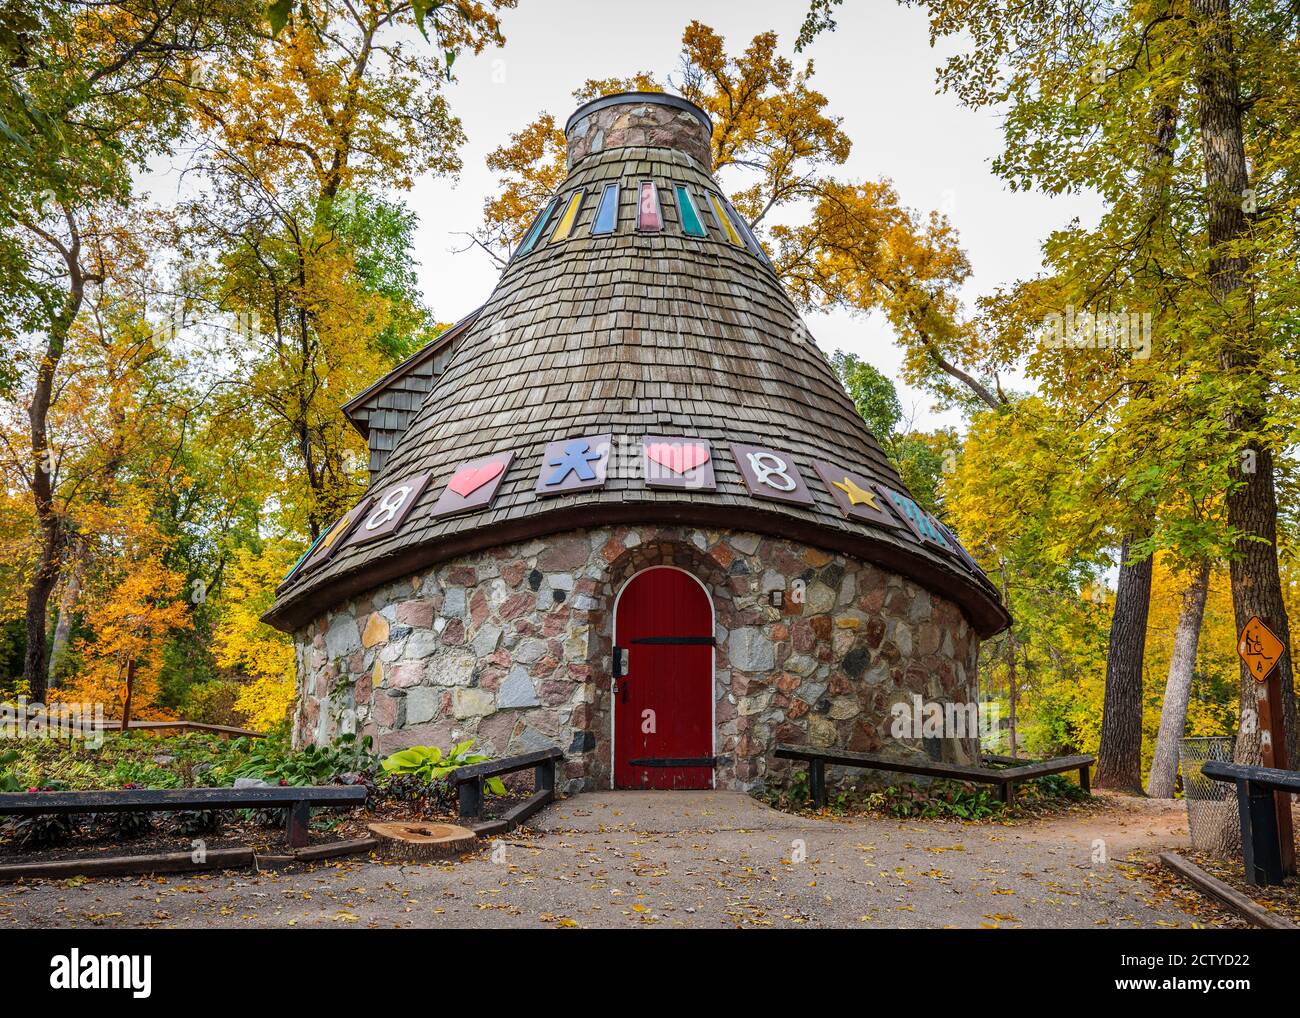 The Witches Hut, Inspired by the Hansel and Gretel fairytale, Kildonan Park, Winnipeg, Manitoba, Canada Stock Photo